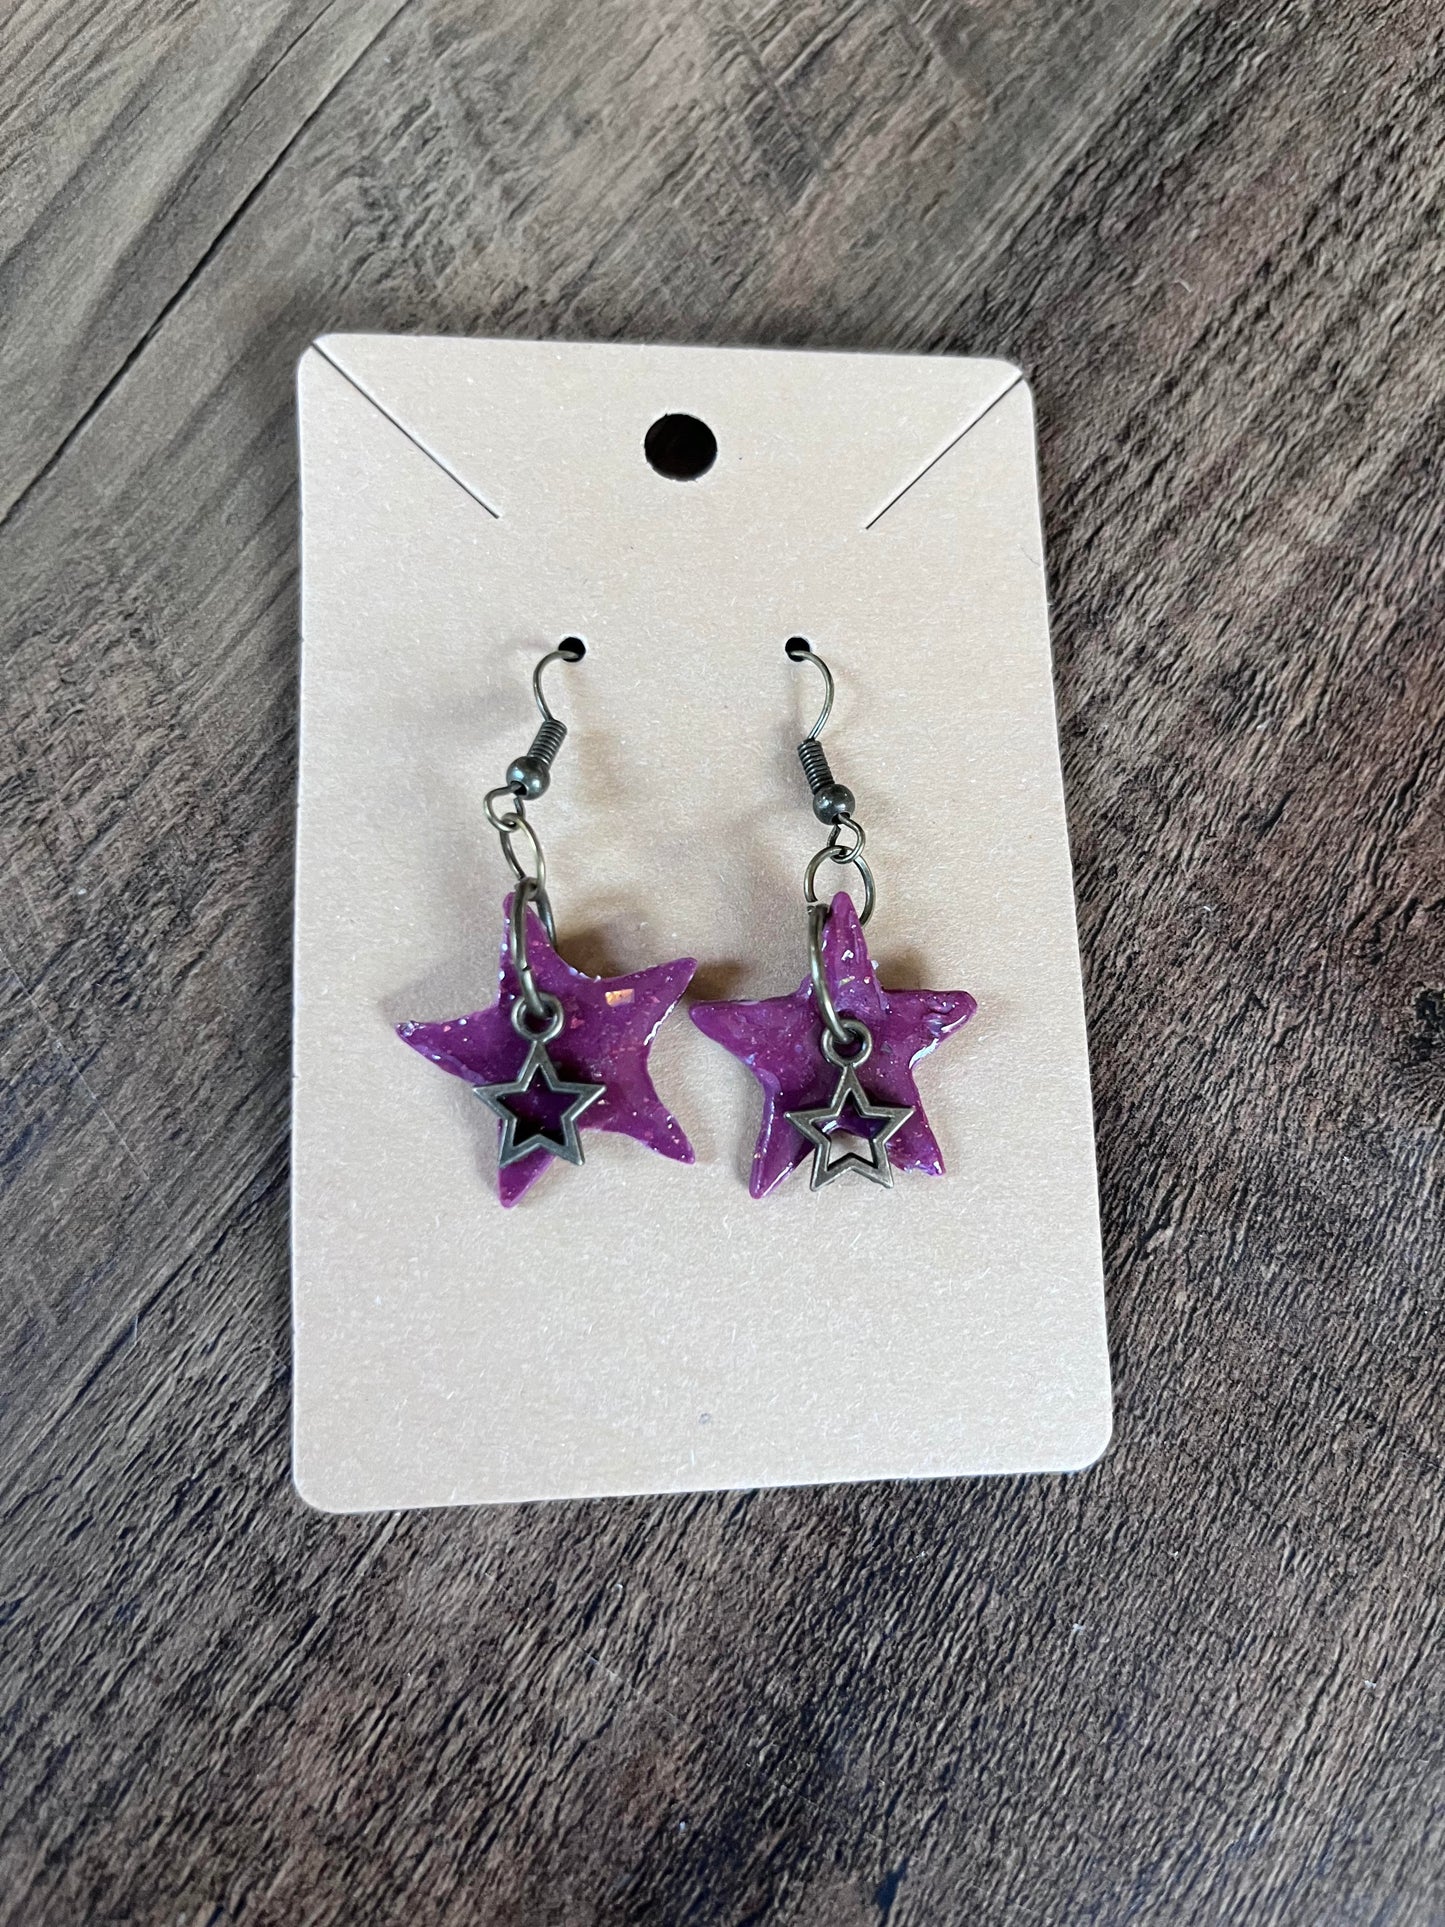 Clay Jewelry in "Burgundy Star" Collection